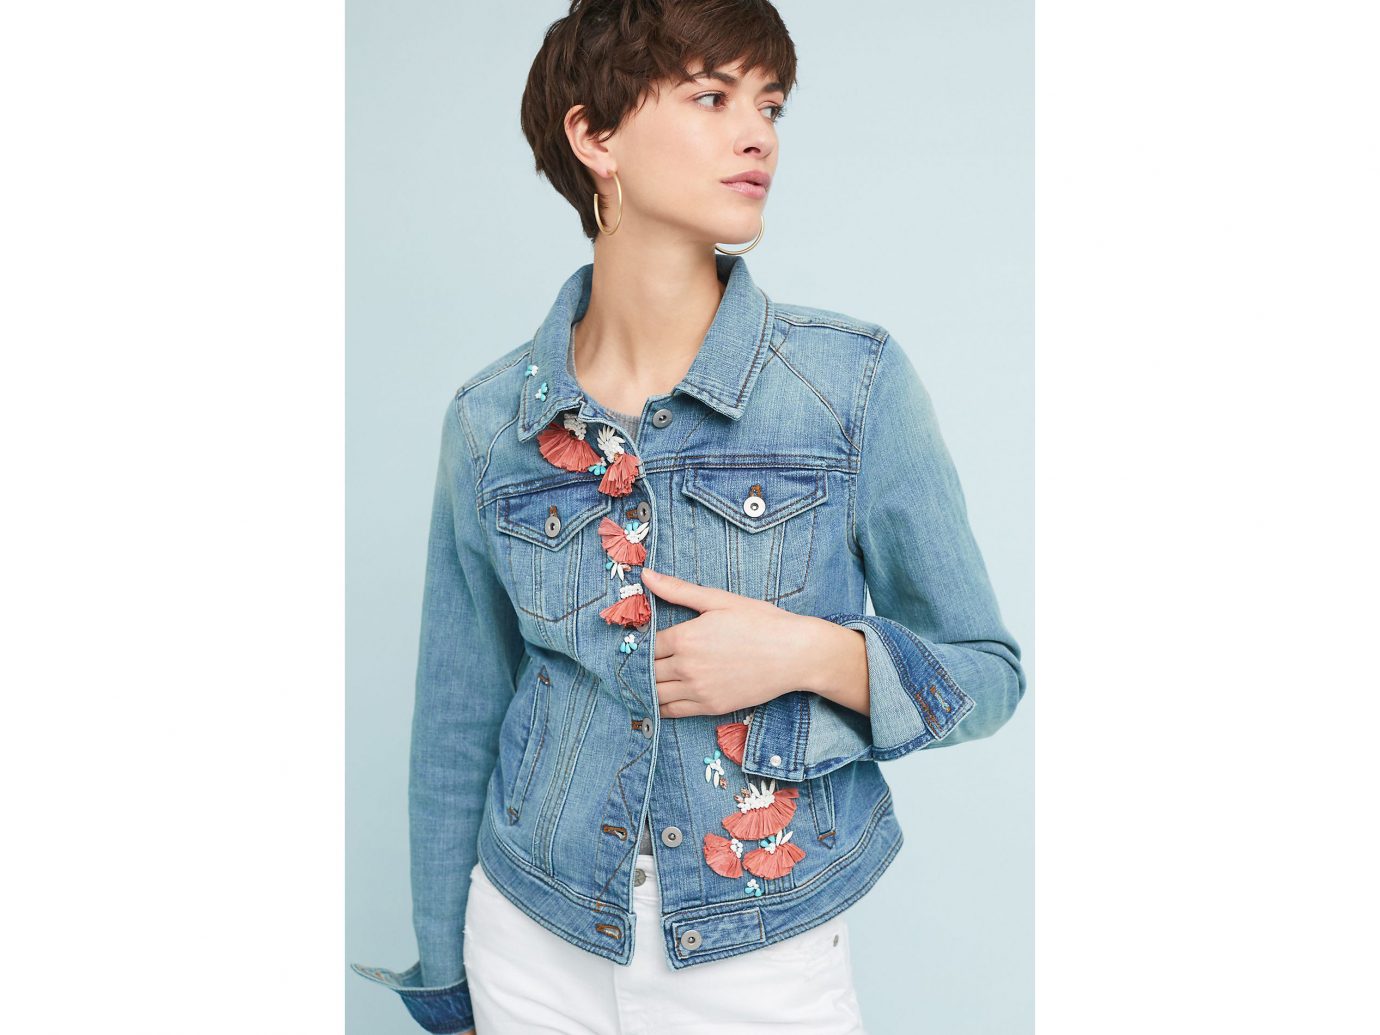 Packing Tips Spring Travel Style + Design Travel Shop person clothing denim standing jeans sleeve shoulder outerwear textile fashion model posing shirt button jacket blouse hand